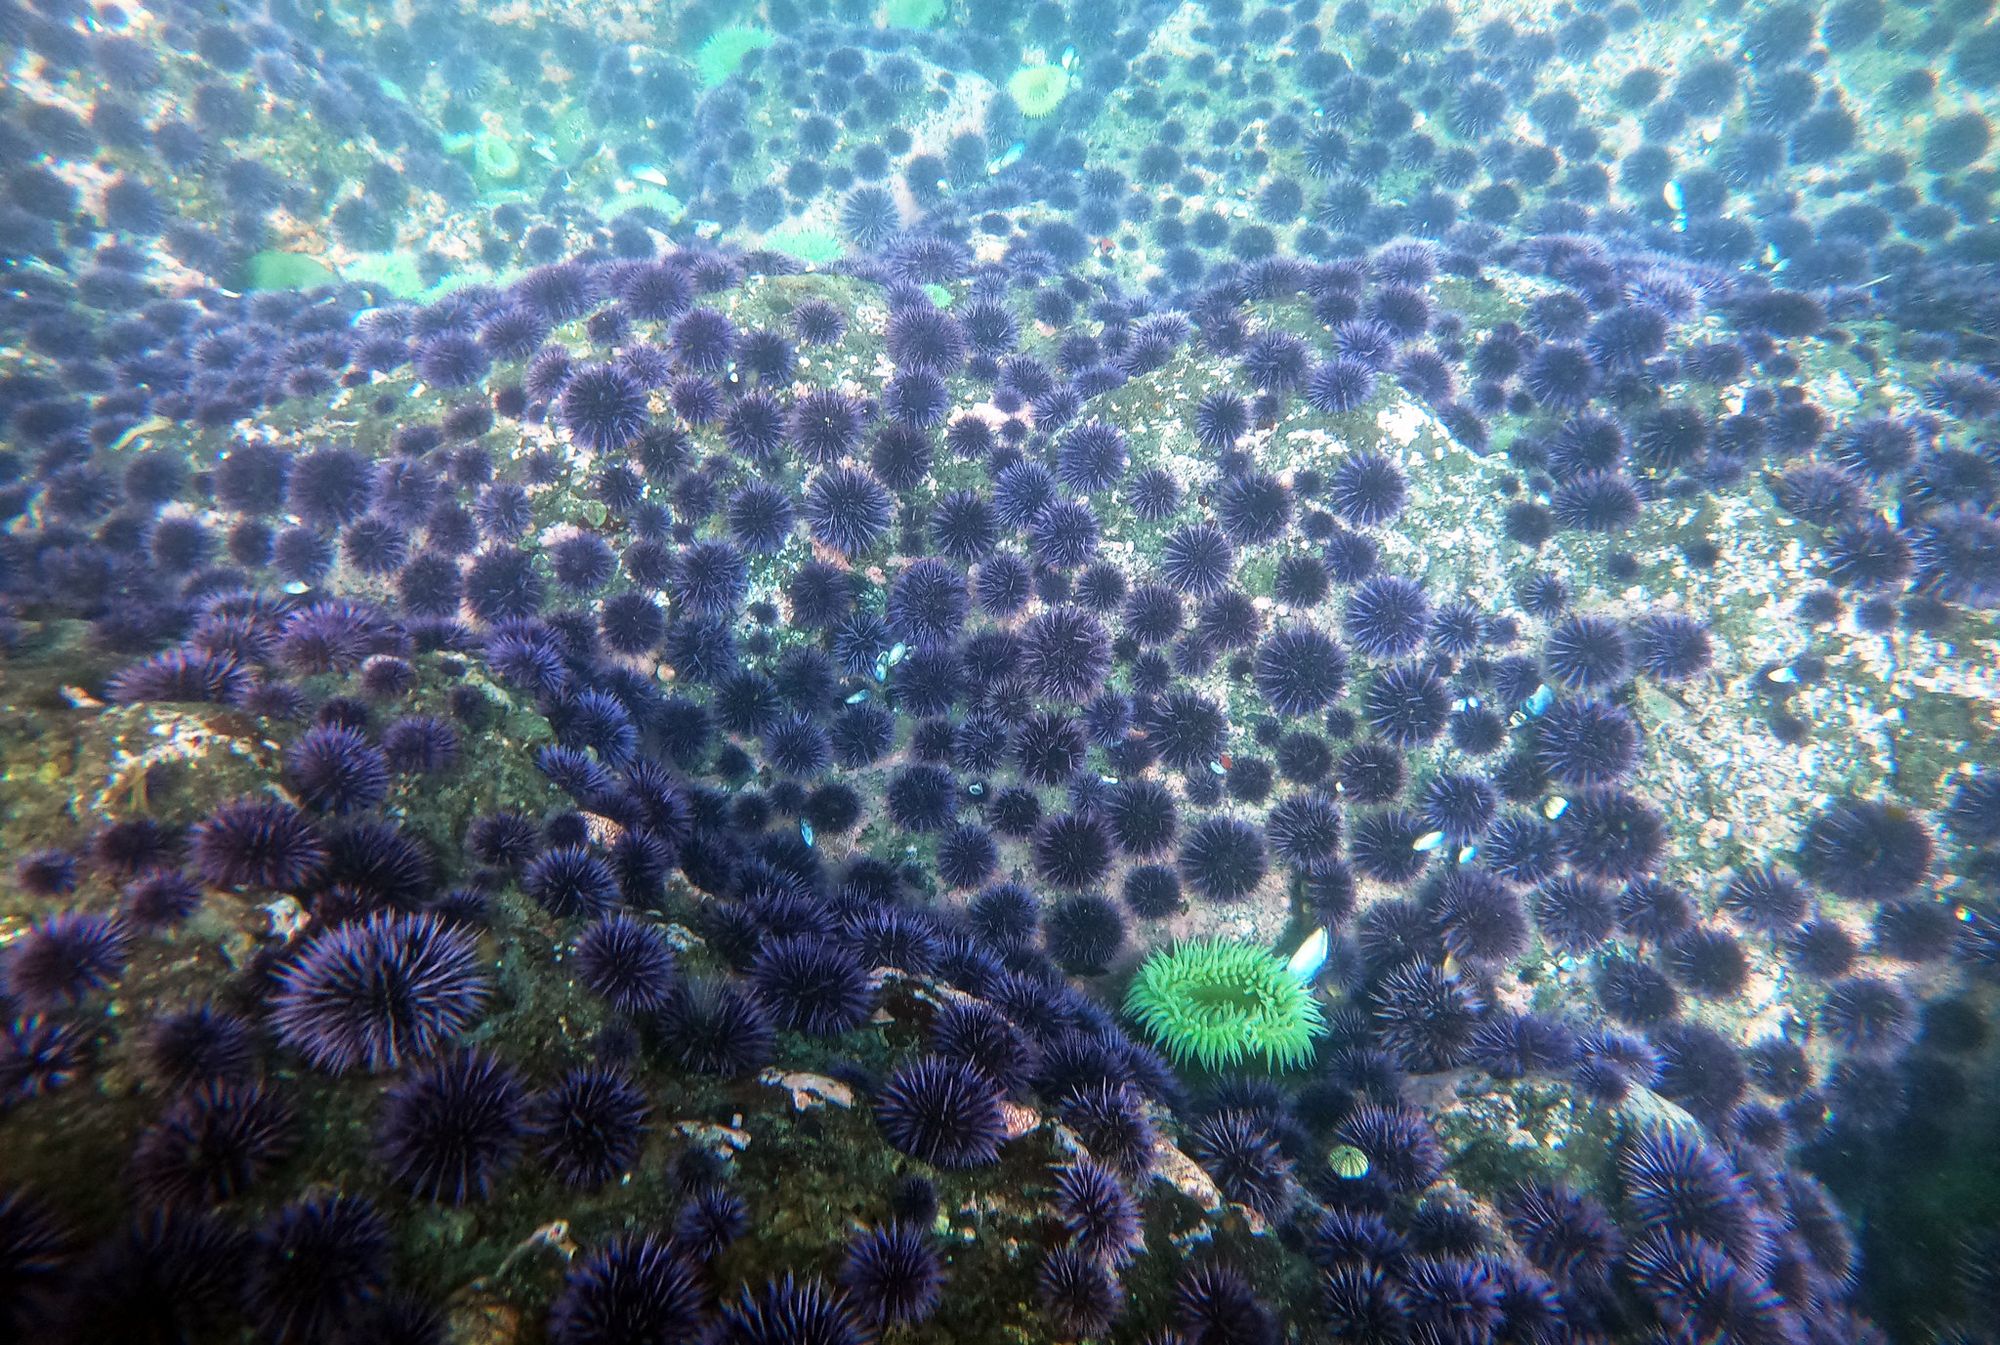 An underwater view of the rocky ocean floor covered in purple sea urchins.